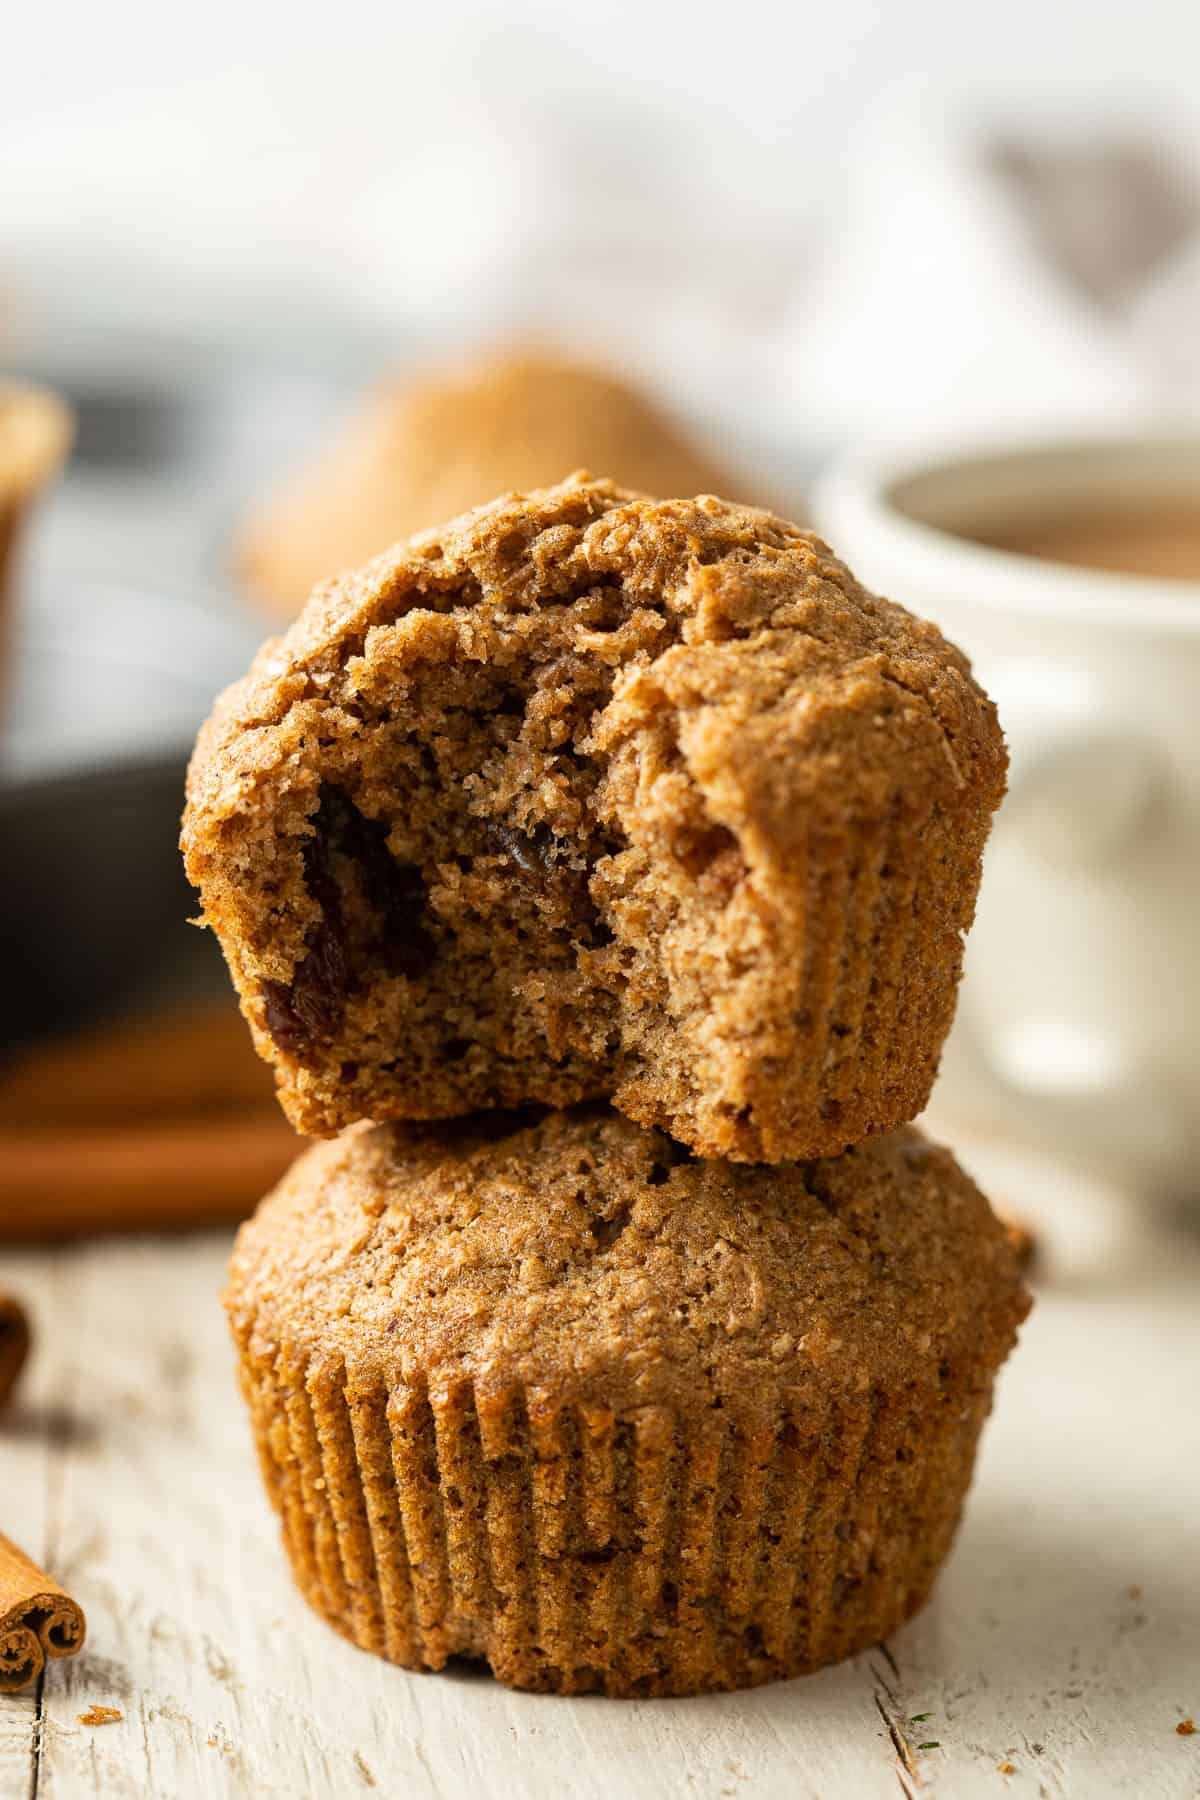 Two stacked Vegan Bran Muffins, the top one with a bite taken out.